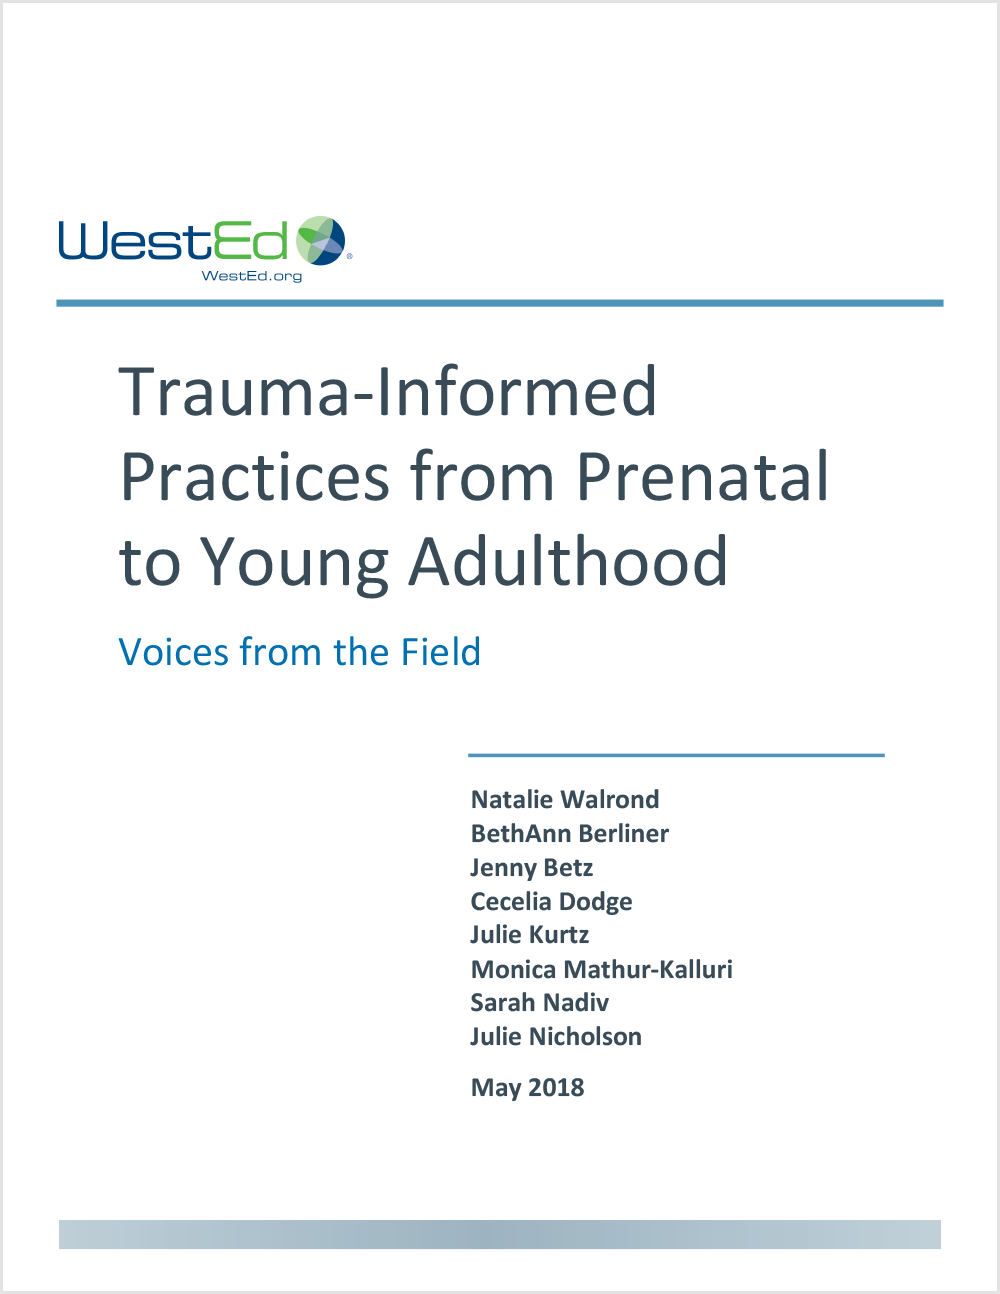 Trauma-Informed Practices from Prenatal to Young Adulthood: Voices from the Field